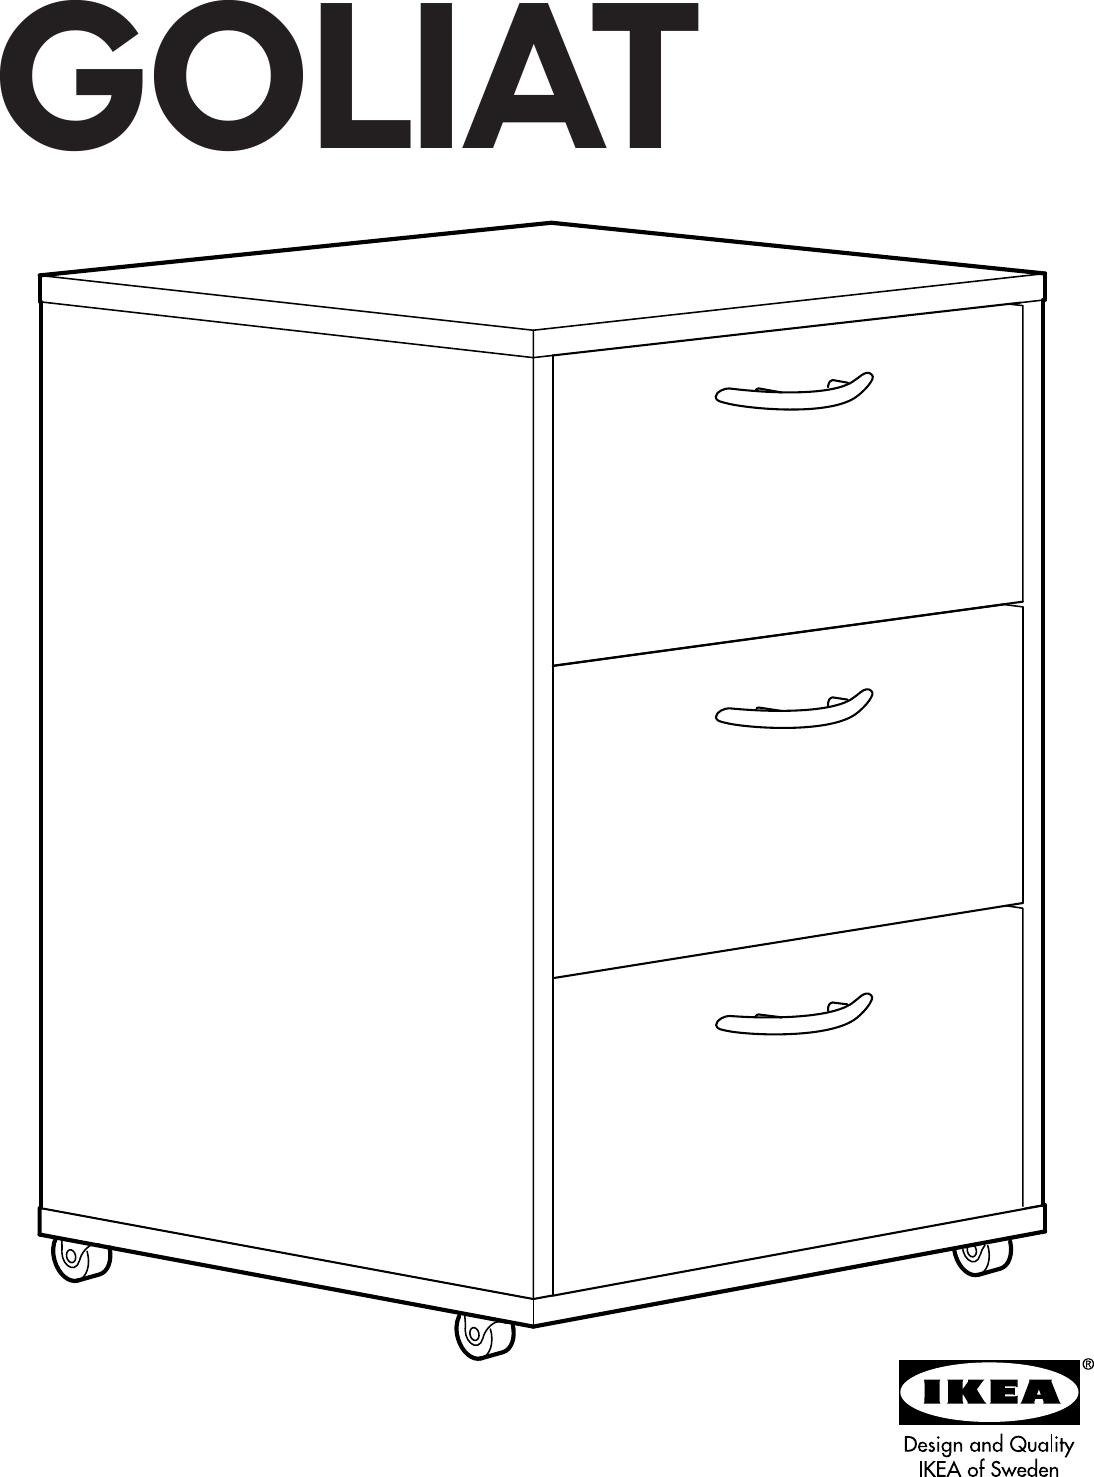 Page 1 of 12 - Ikea Ikea-Goliat-Drawer-Unit-Casters-Assembly-Instruction